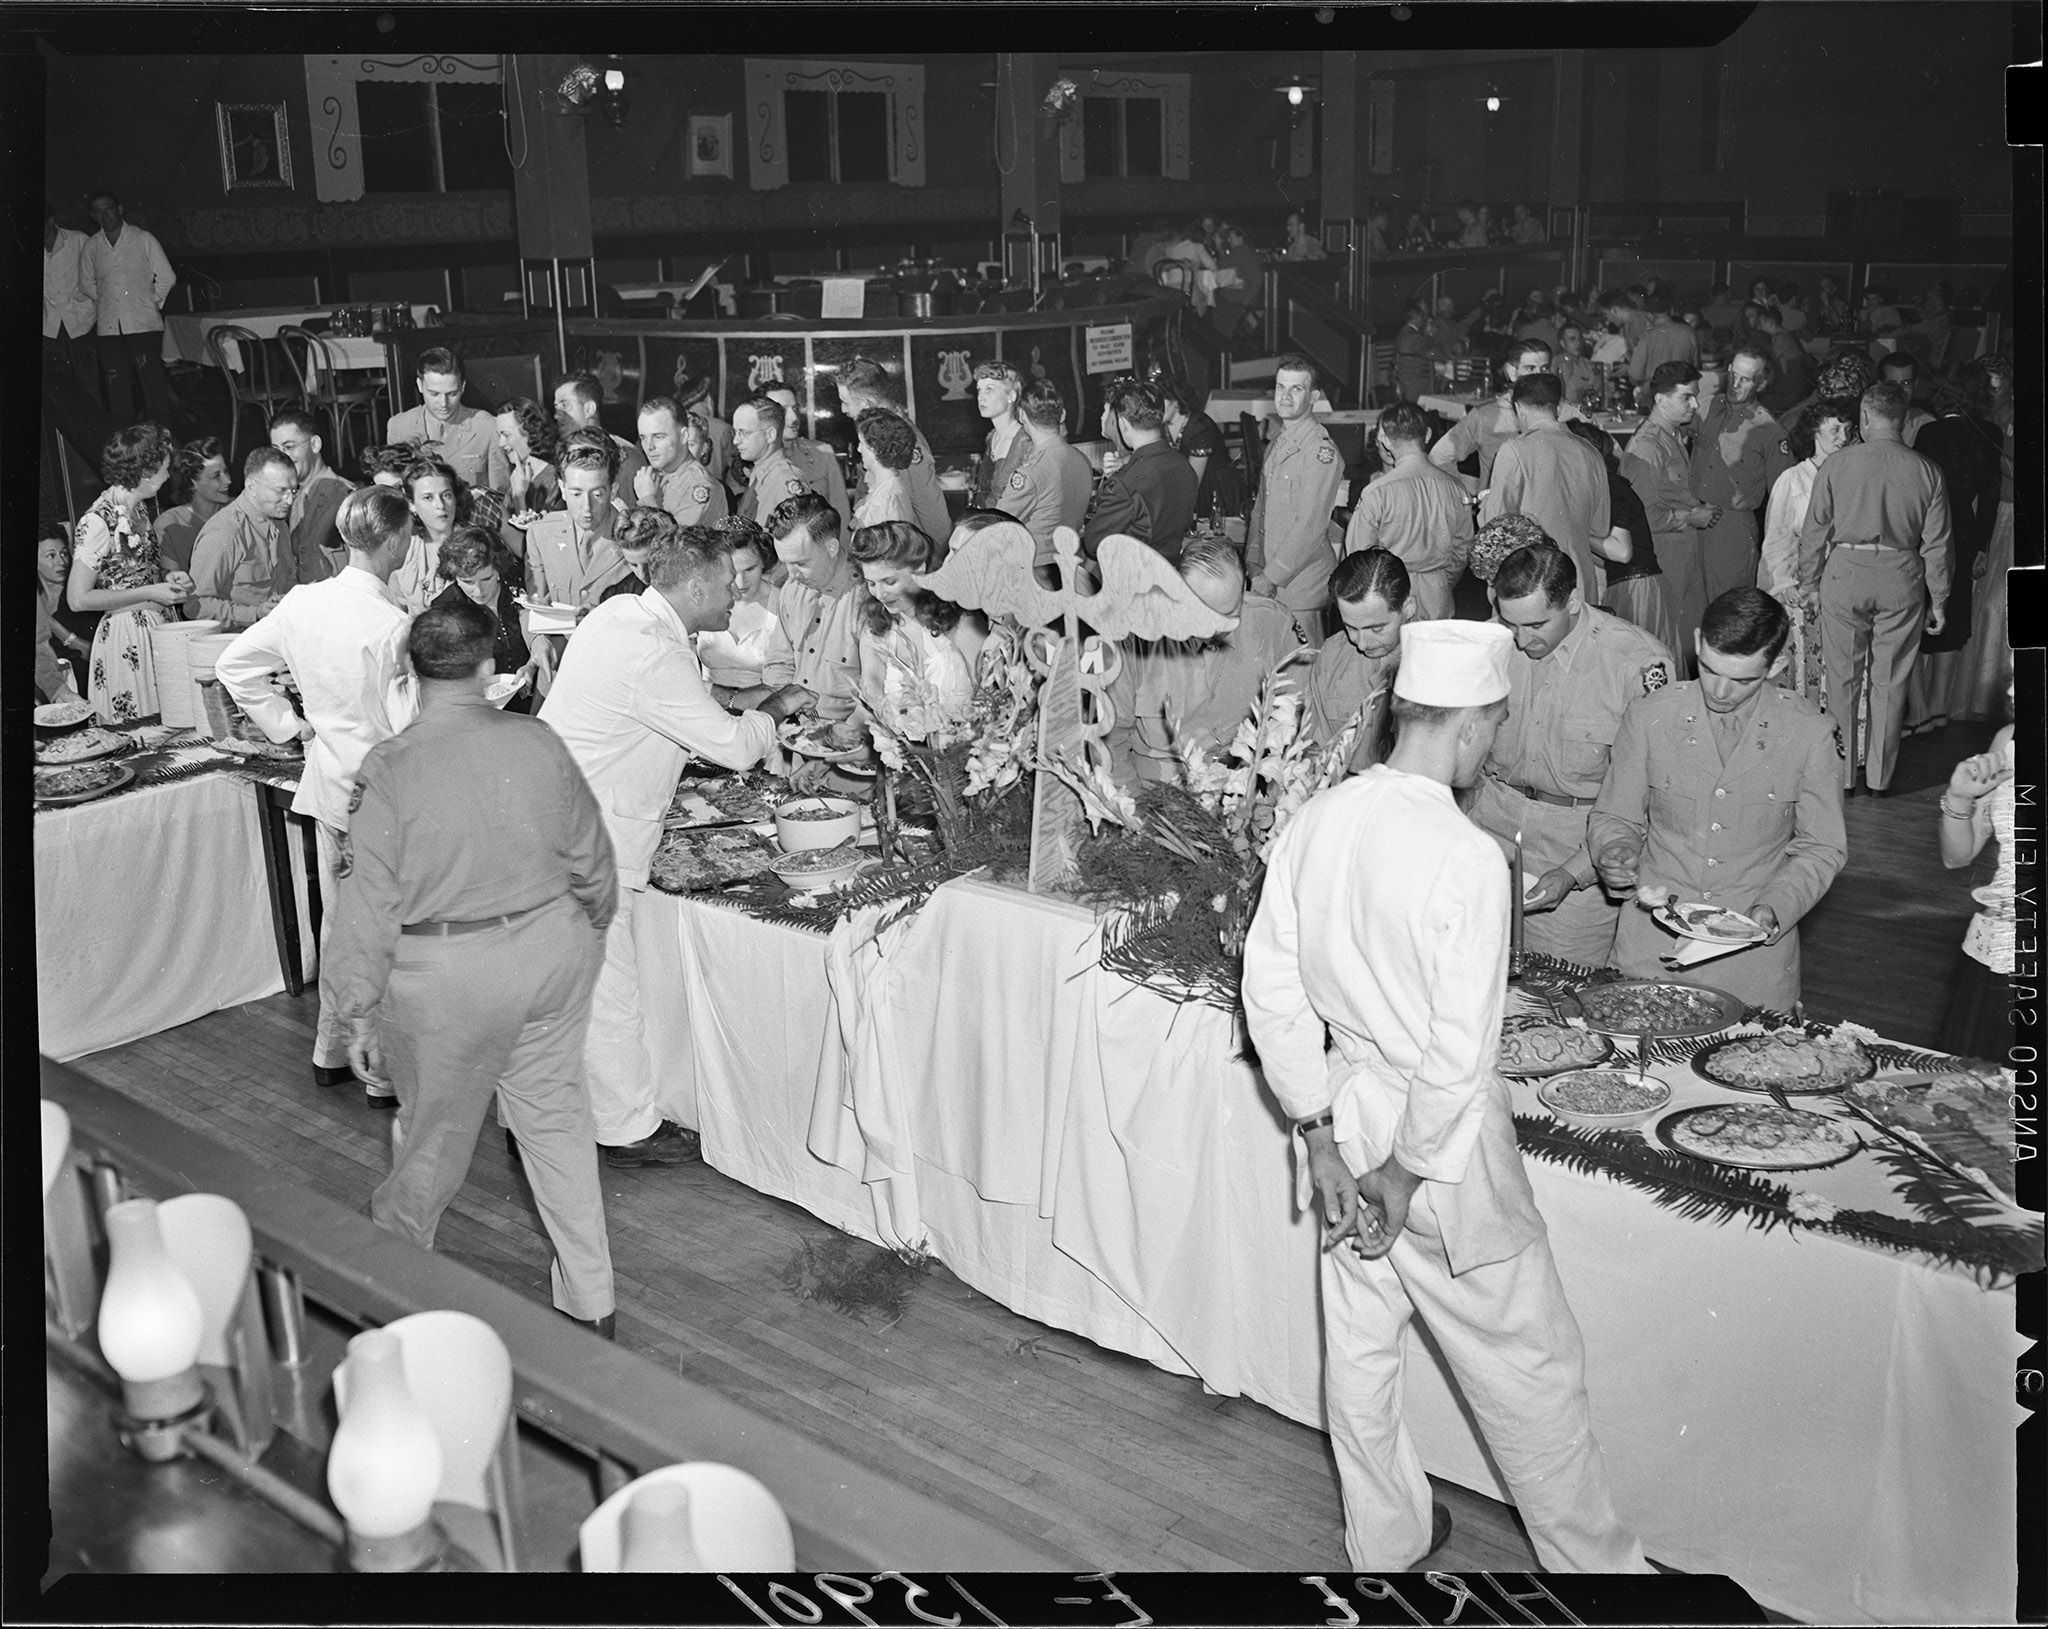 A buffet table filled with an assortment of food and a line of hungry guests waiting their turn.